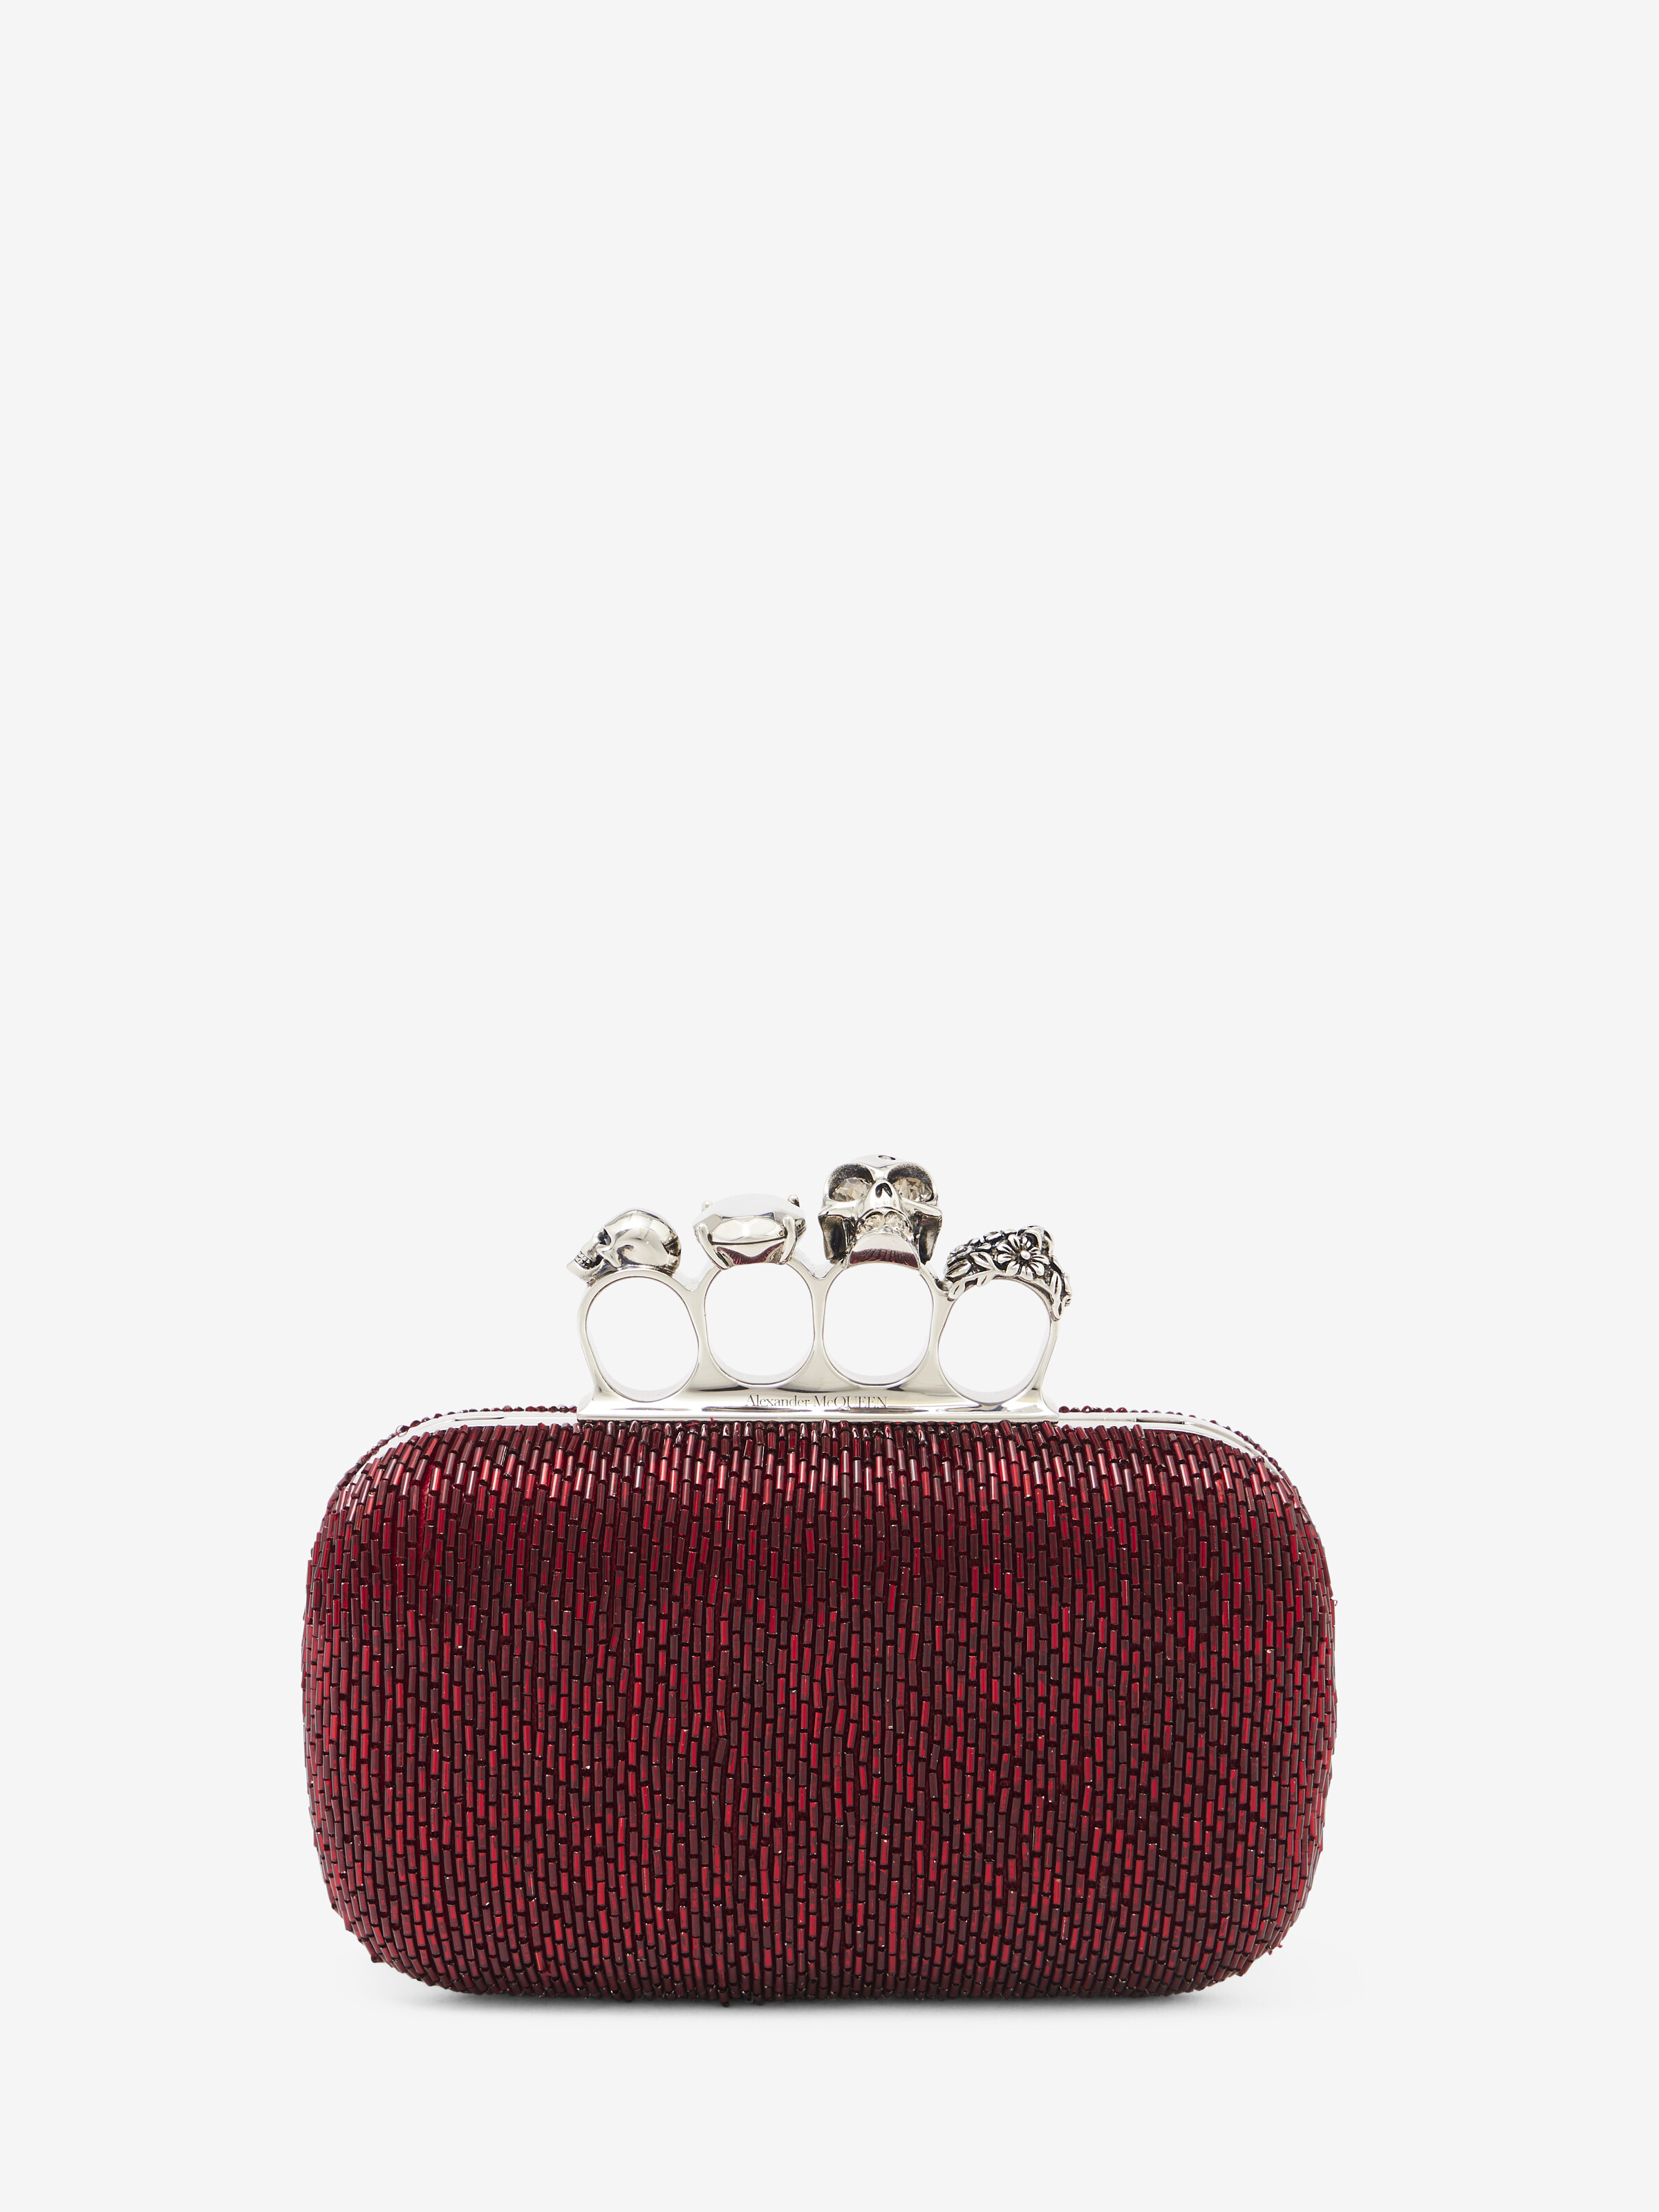 Shop authentic Alexander McQueen Skull Box Clutch at revogue for just USD  620.00